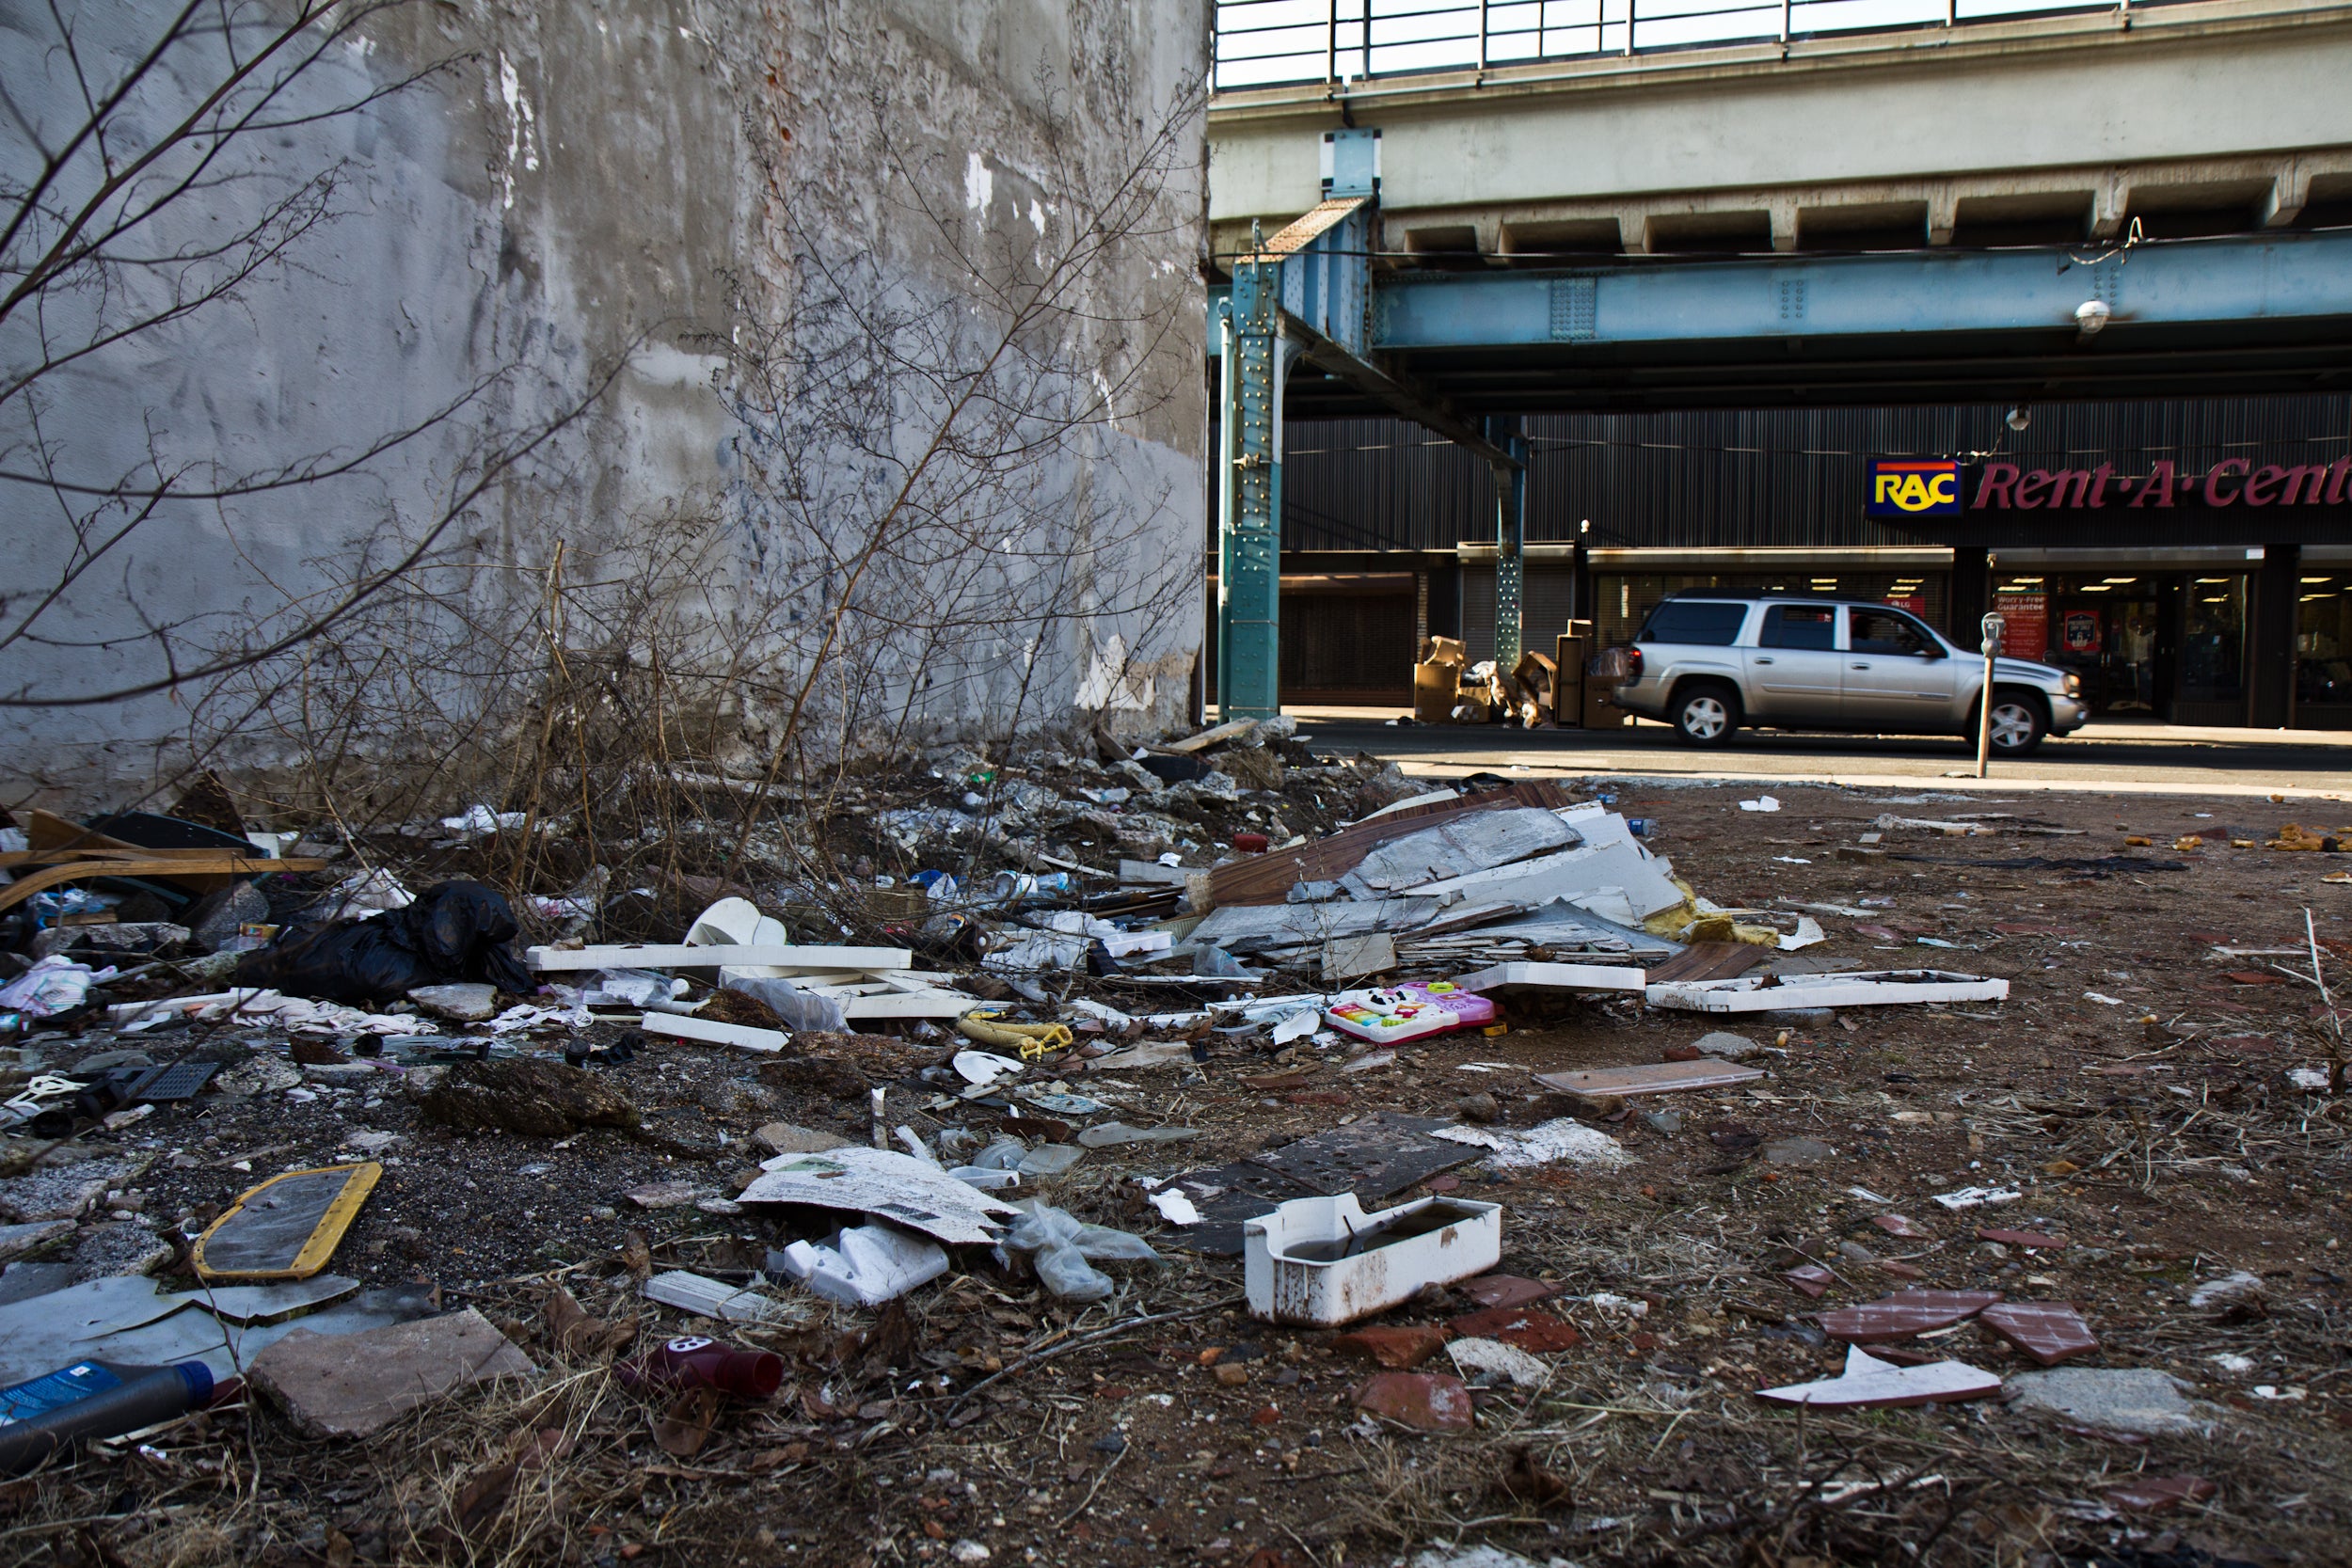 Kensington Avenue and F streets is rated a “4” on Philadelphia’s Litter Index. (Kimberly Paynter/WHYY)